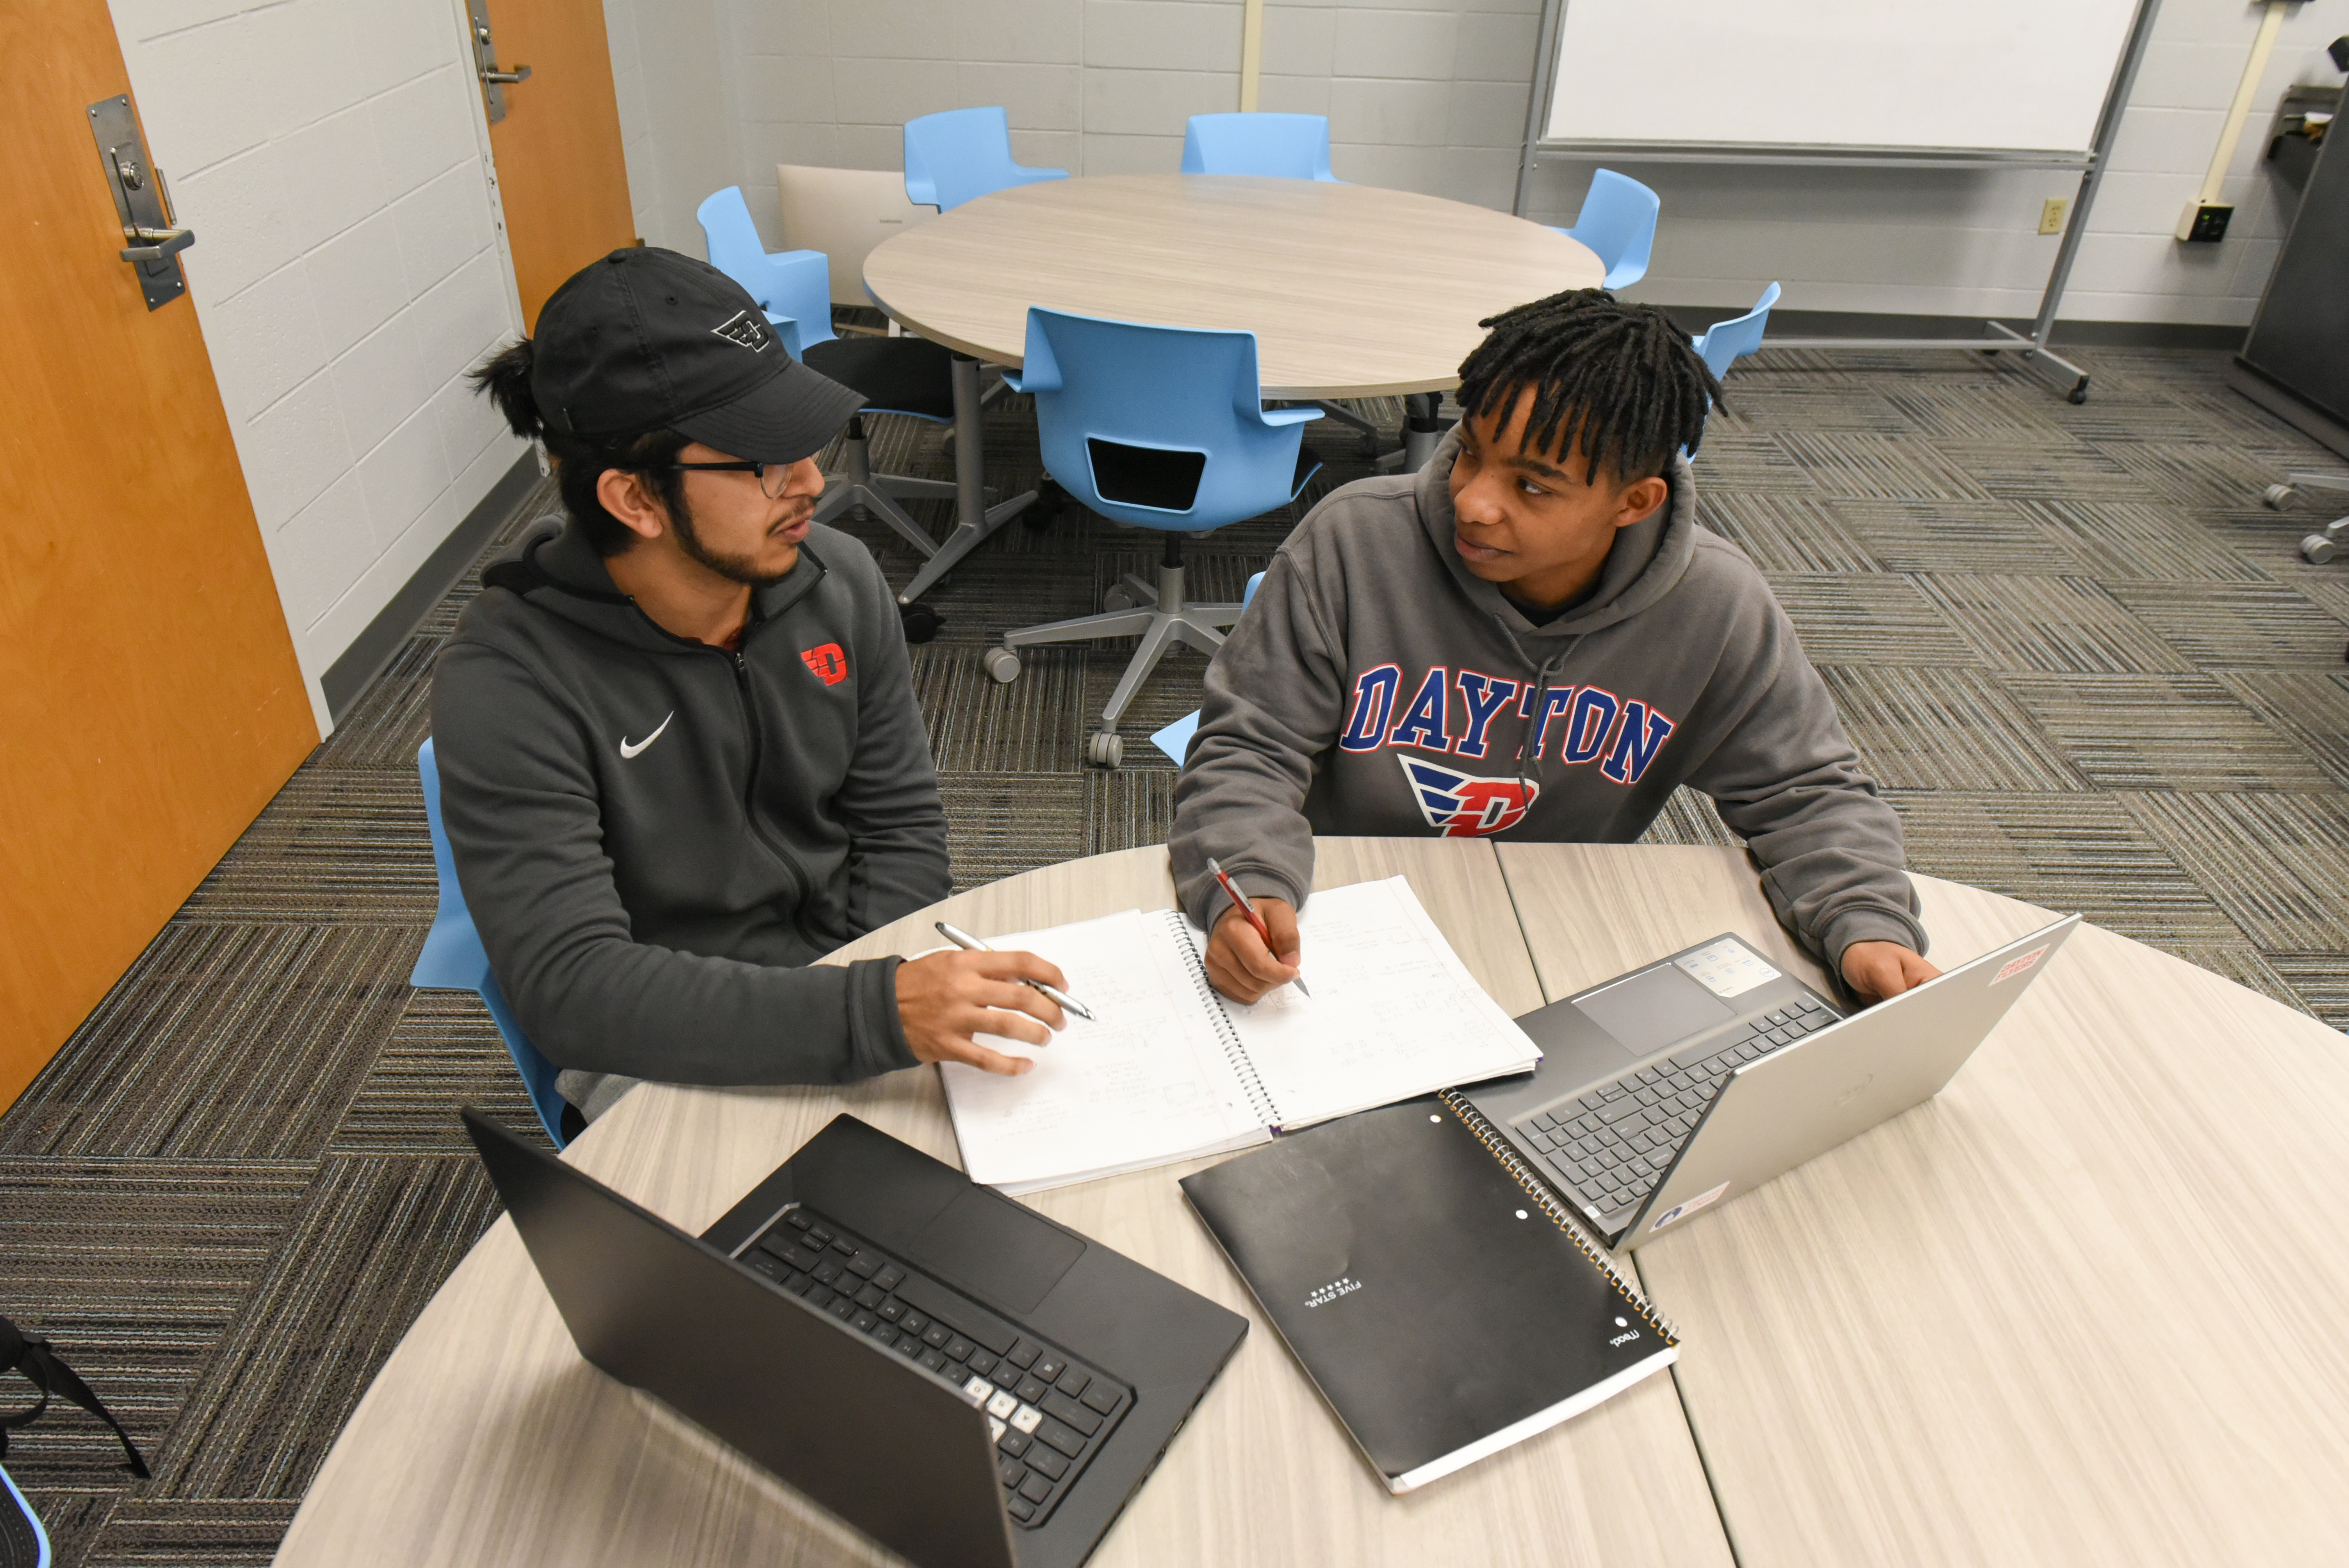 Two males students studying together at a table.